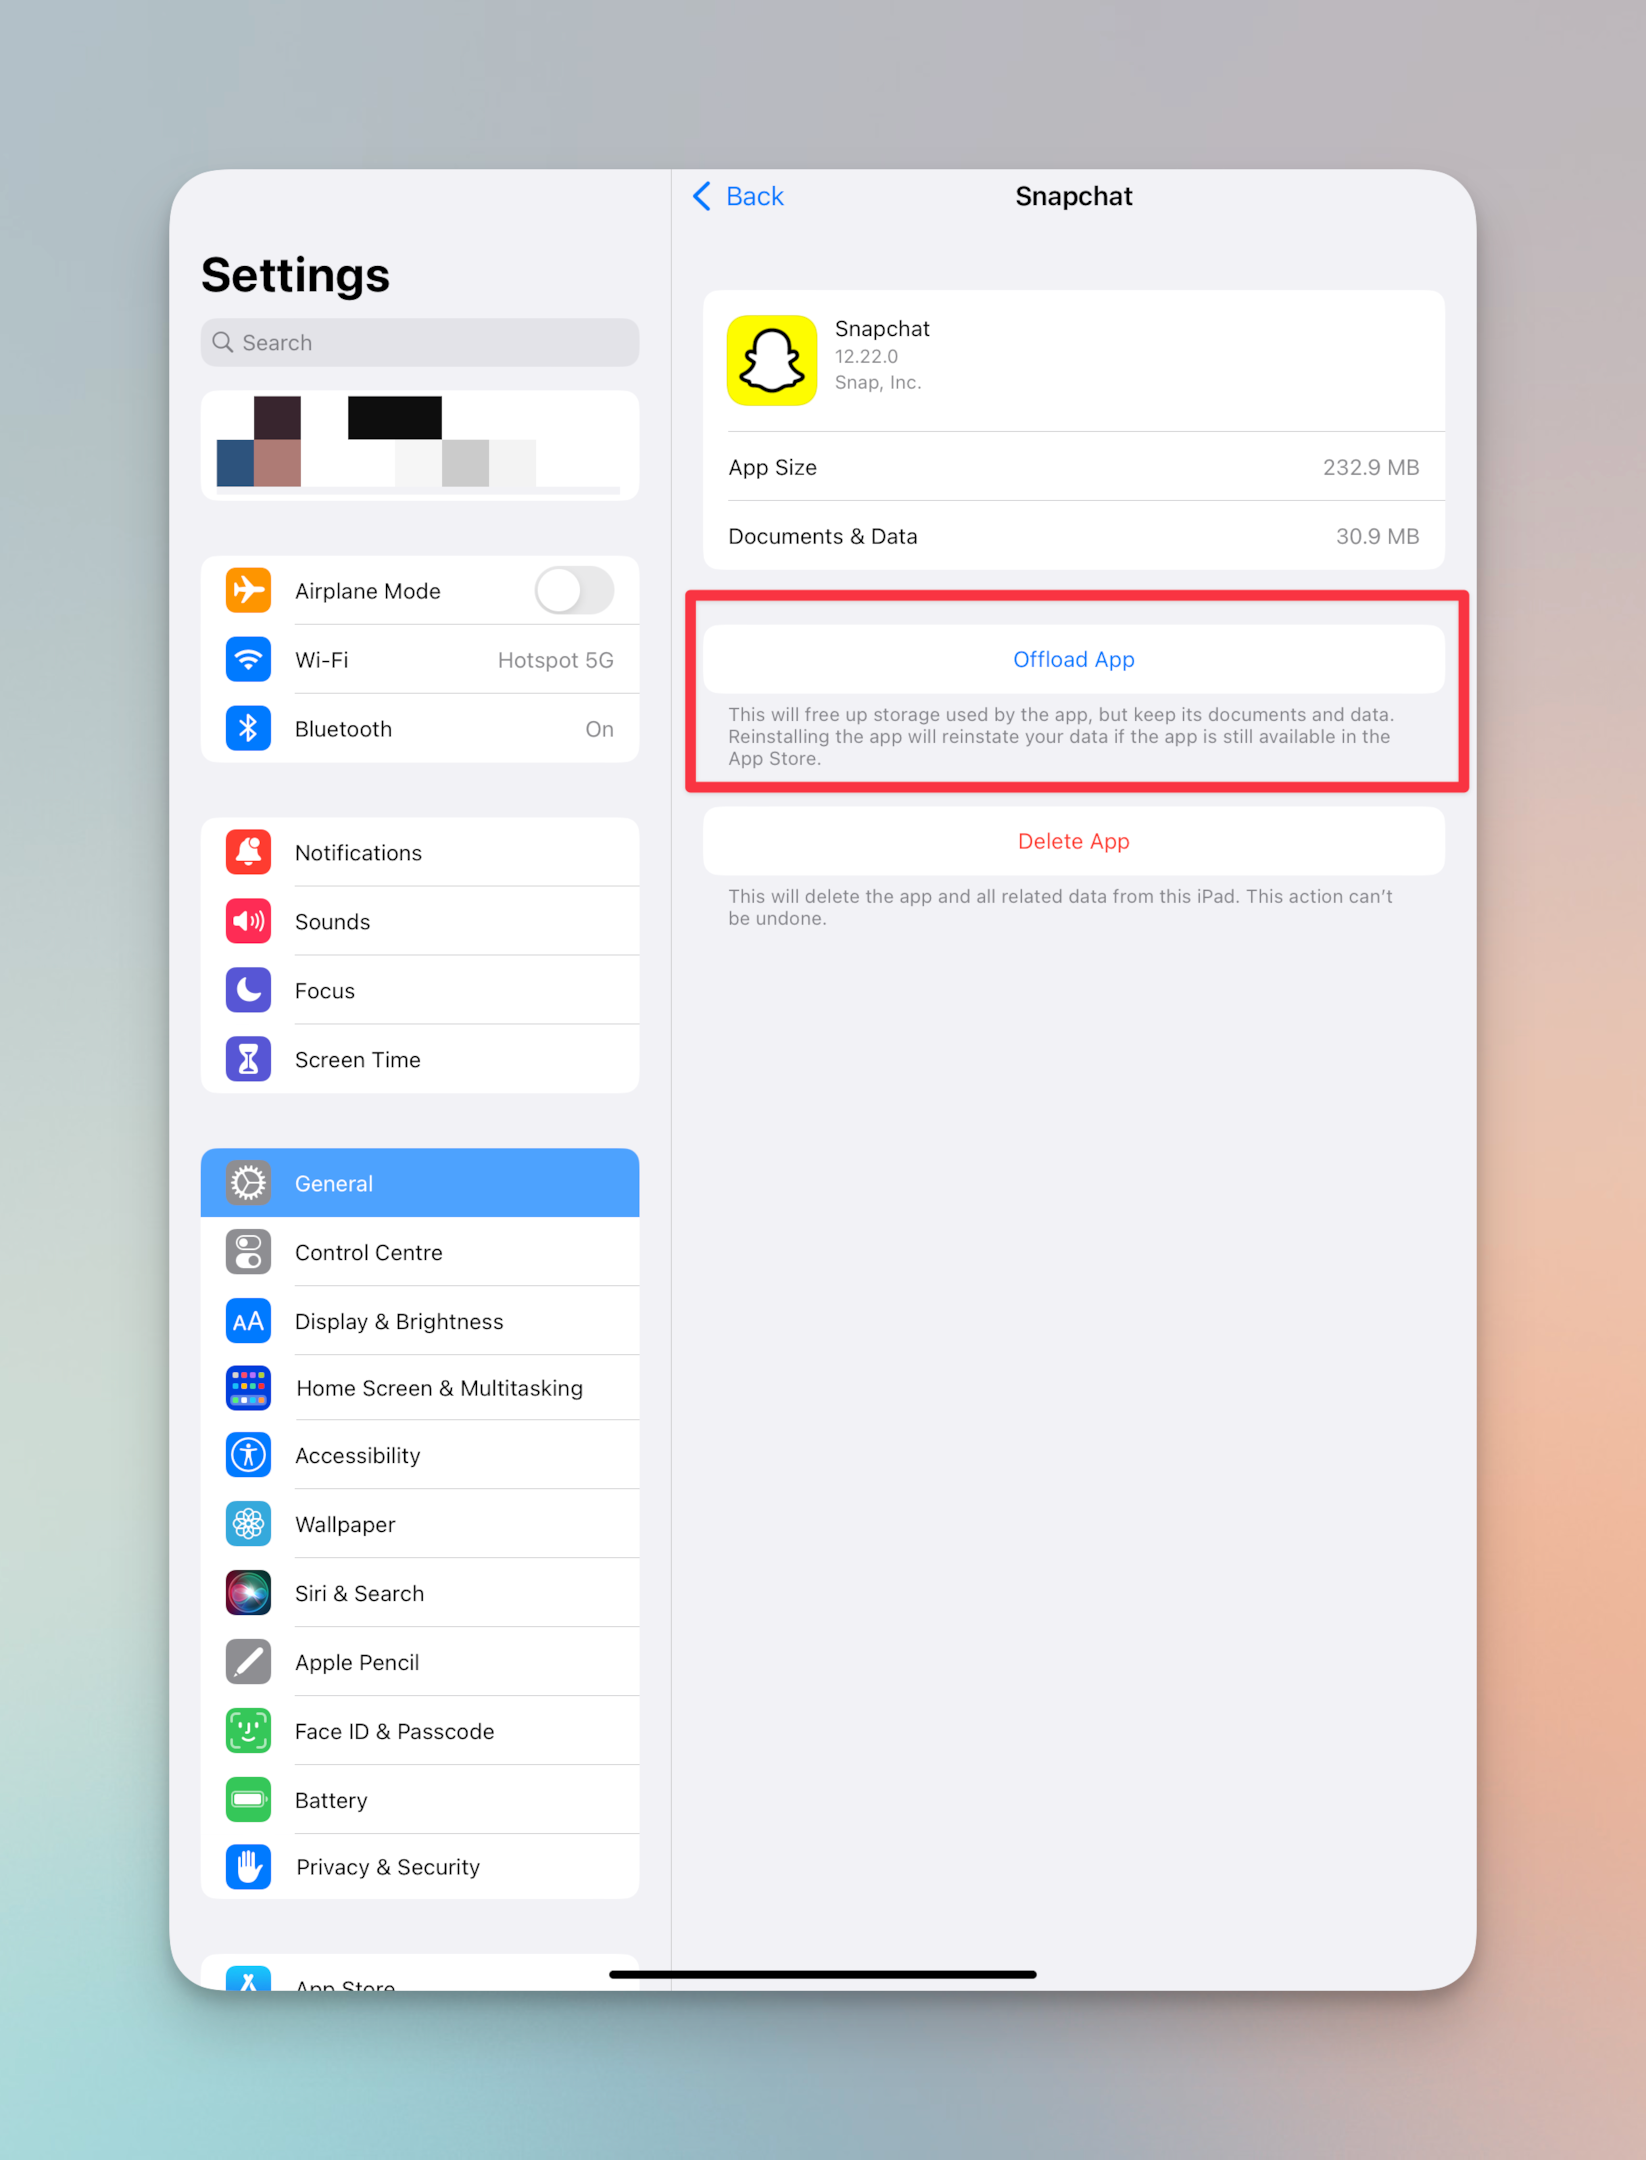 Remote.tools showing how to offload Snapchat app from iPhone/iPad